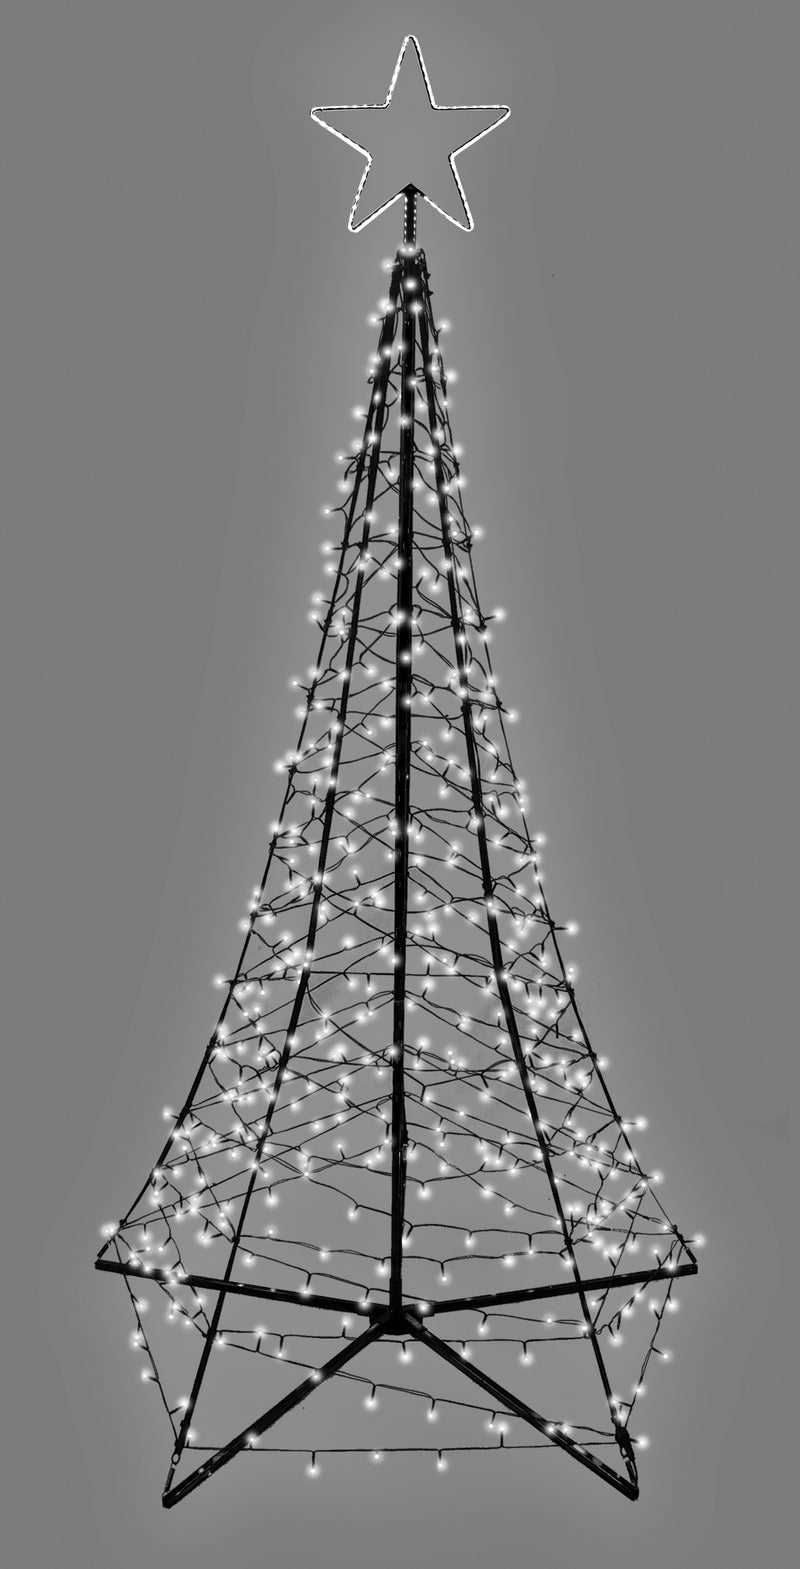 7' LED SPIRE TREE WITH STAR